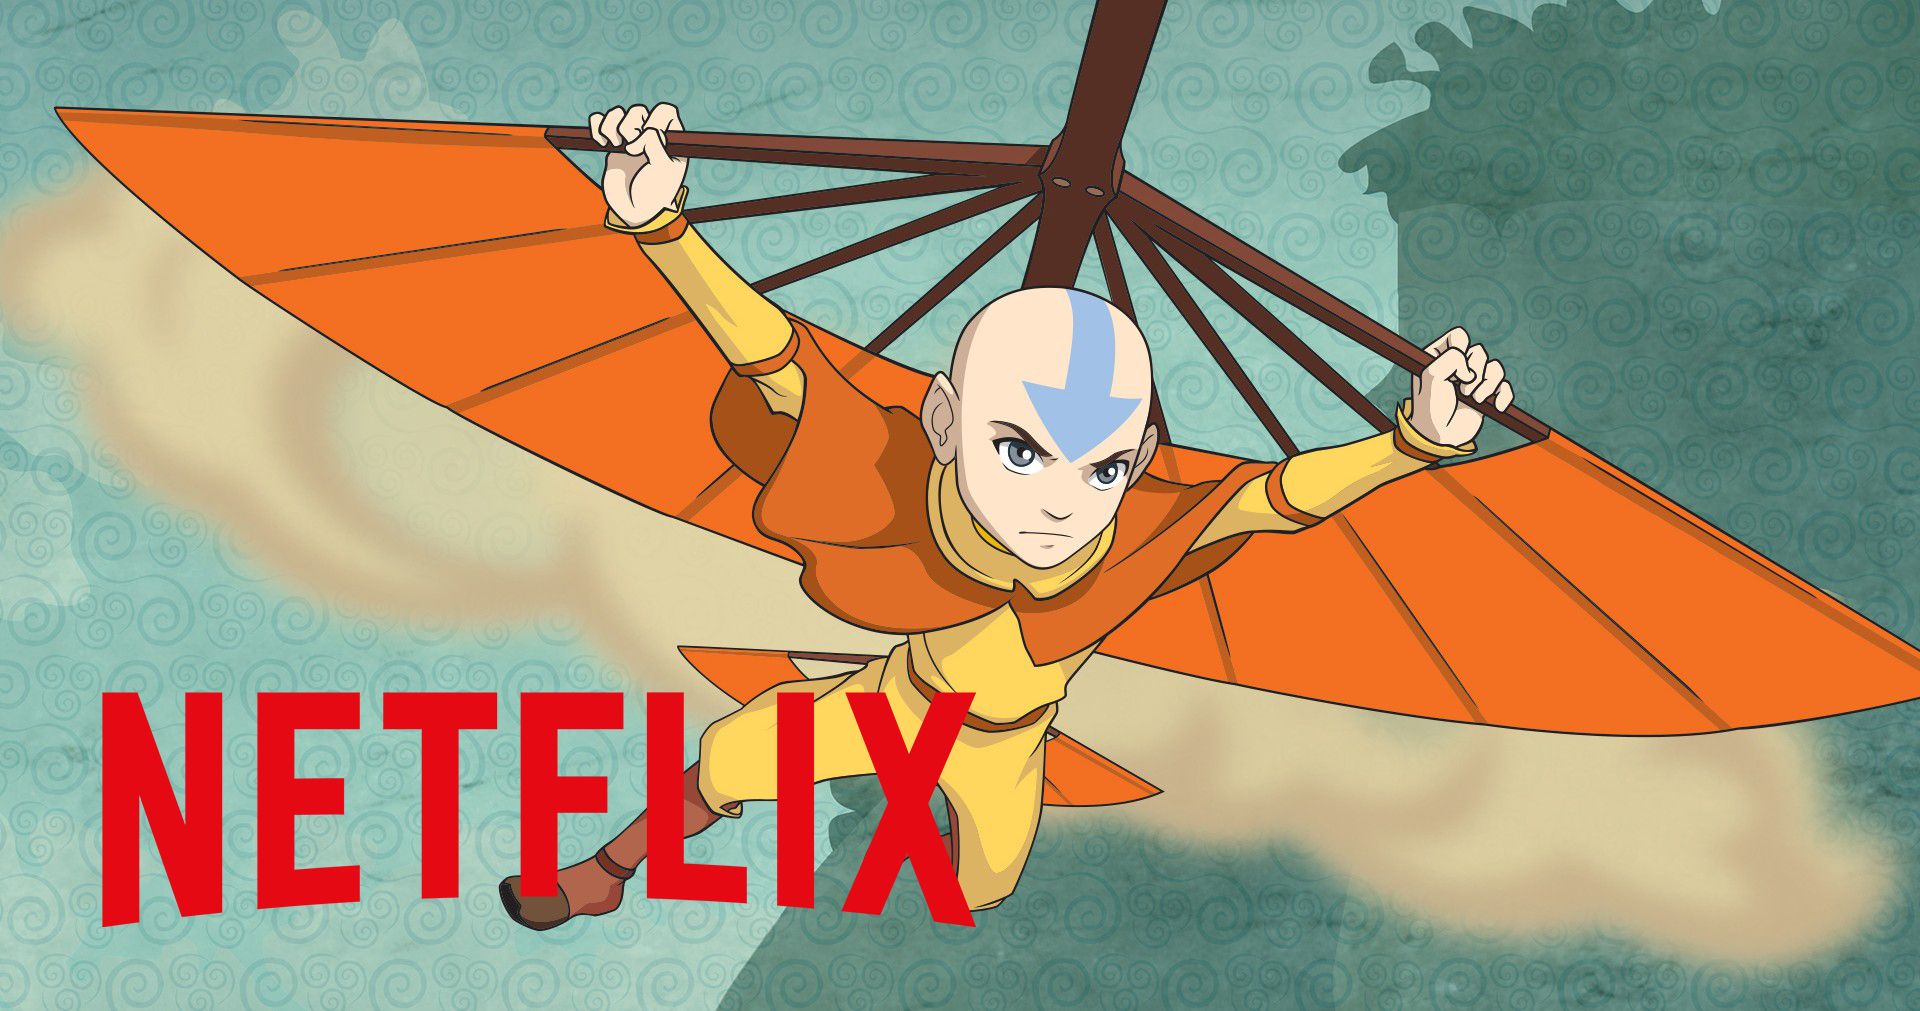 Avatar The Last Airbender Creators Exit LiveAction Series Citing Creative Differences With Netflix